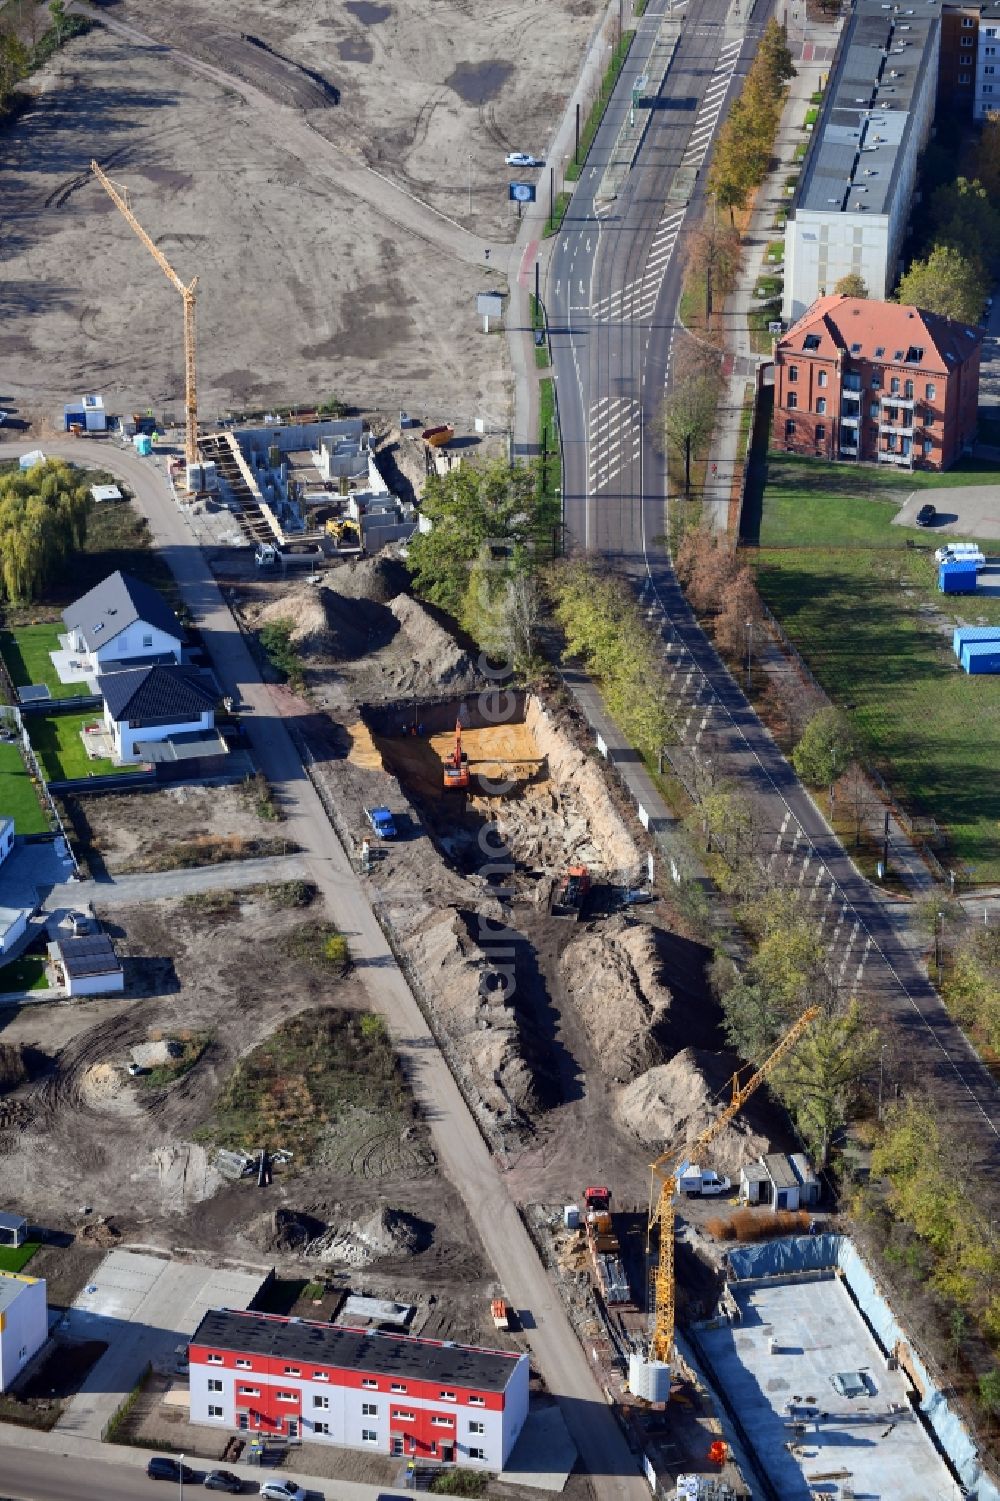 Aerial image Magdeburg - Construction site for the multi-family residential building on Brueckstrasse - Vor der Turmschanze in the district Brueckfeld in Magdeburg in the state Saxony-Anhalt, Germany